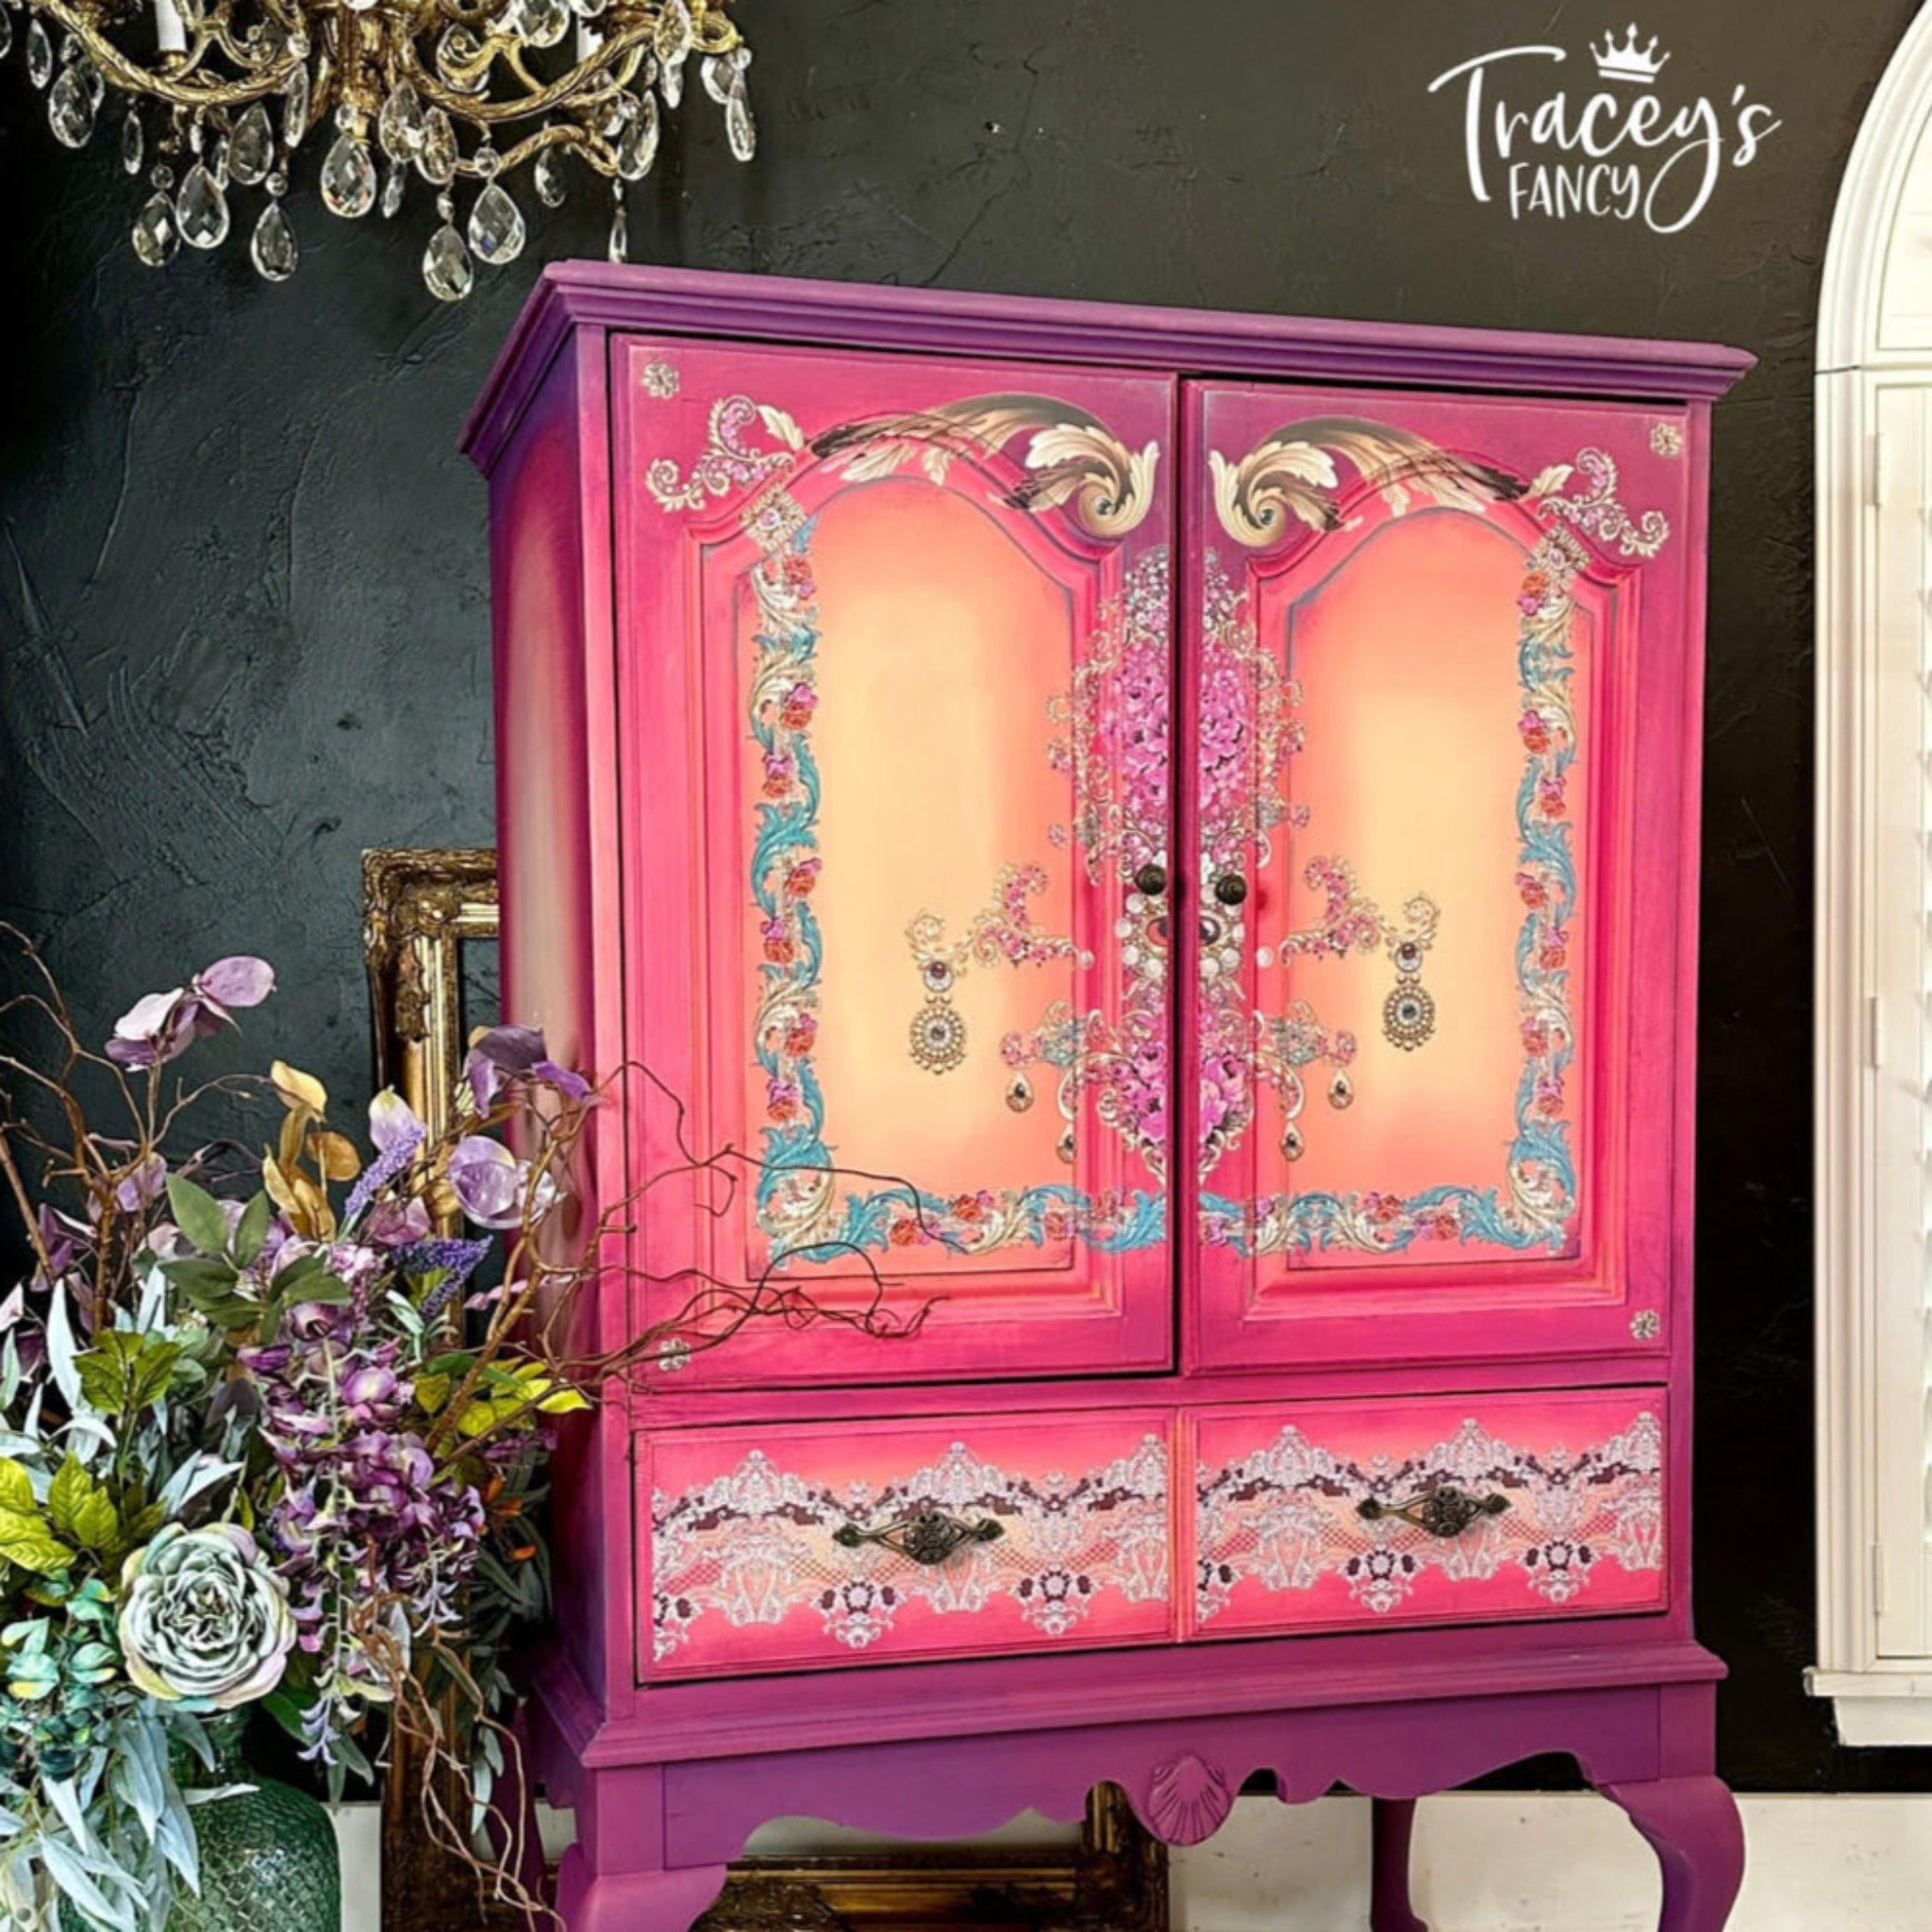 A vintage armoire refurbished by Tracy's Fancy is painted a blend of purples, pinks, and yellow and features Belles & Whistles The Gilded Age transfer on it.